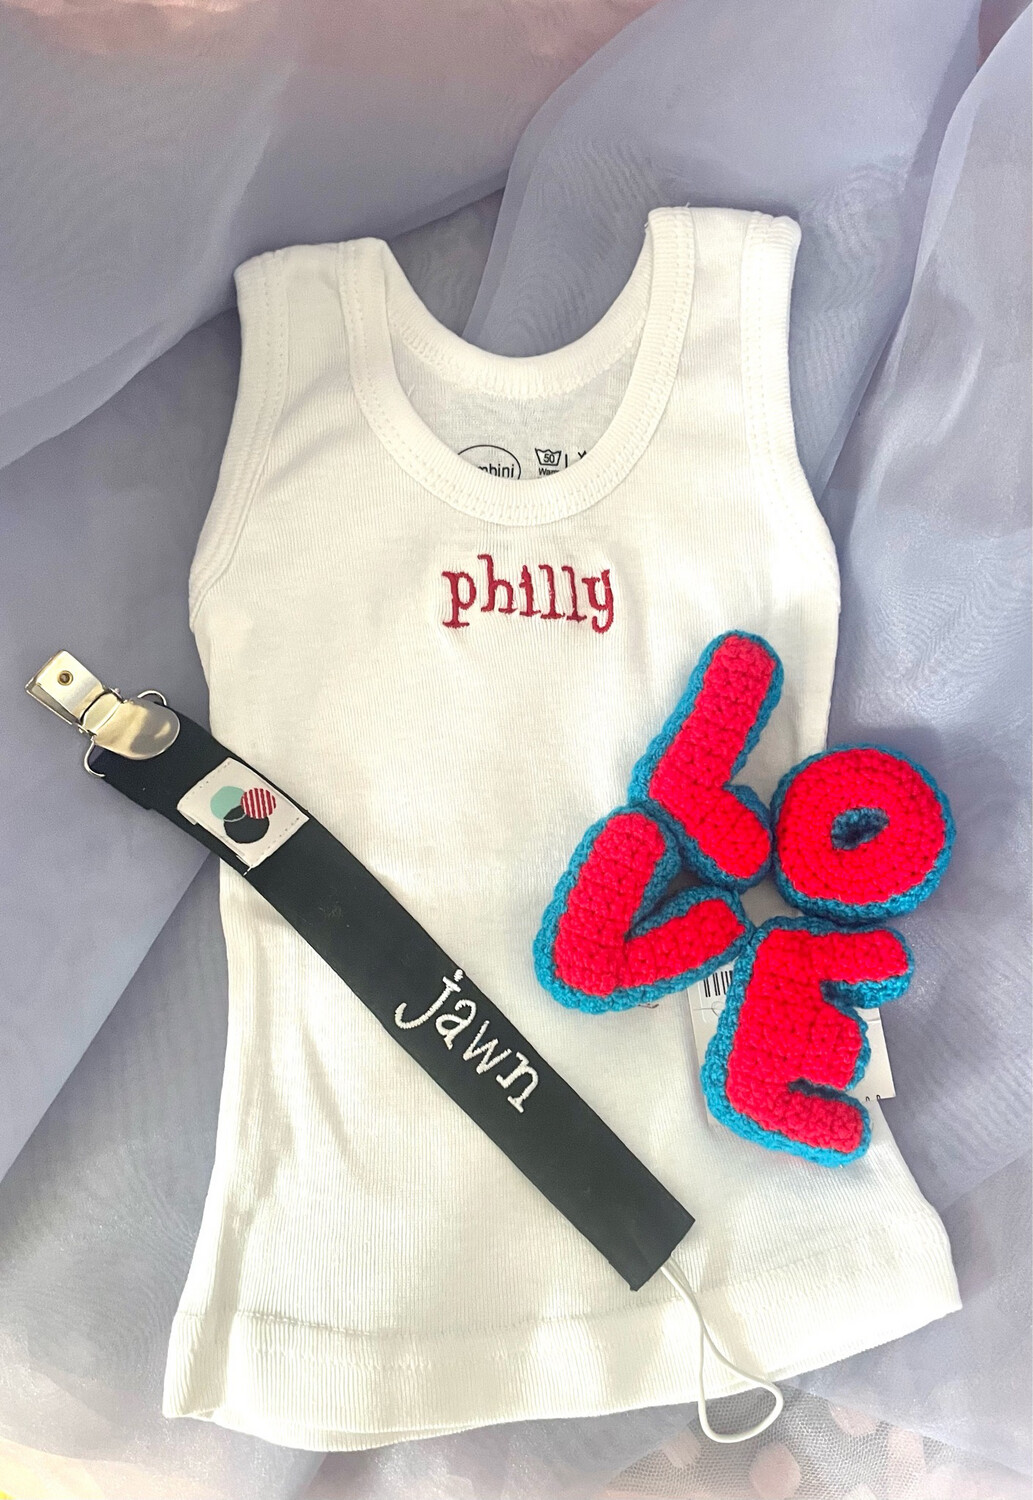 Philly Baby Tank